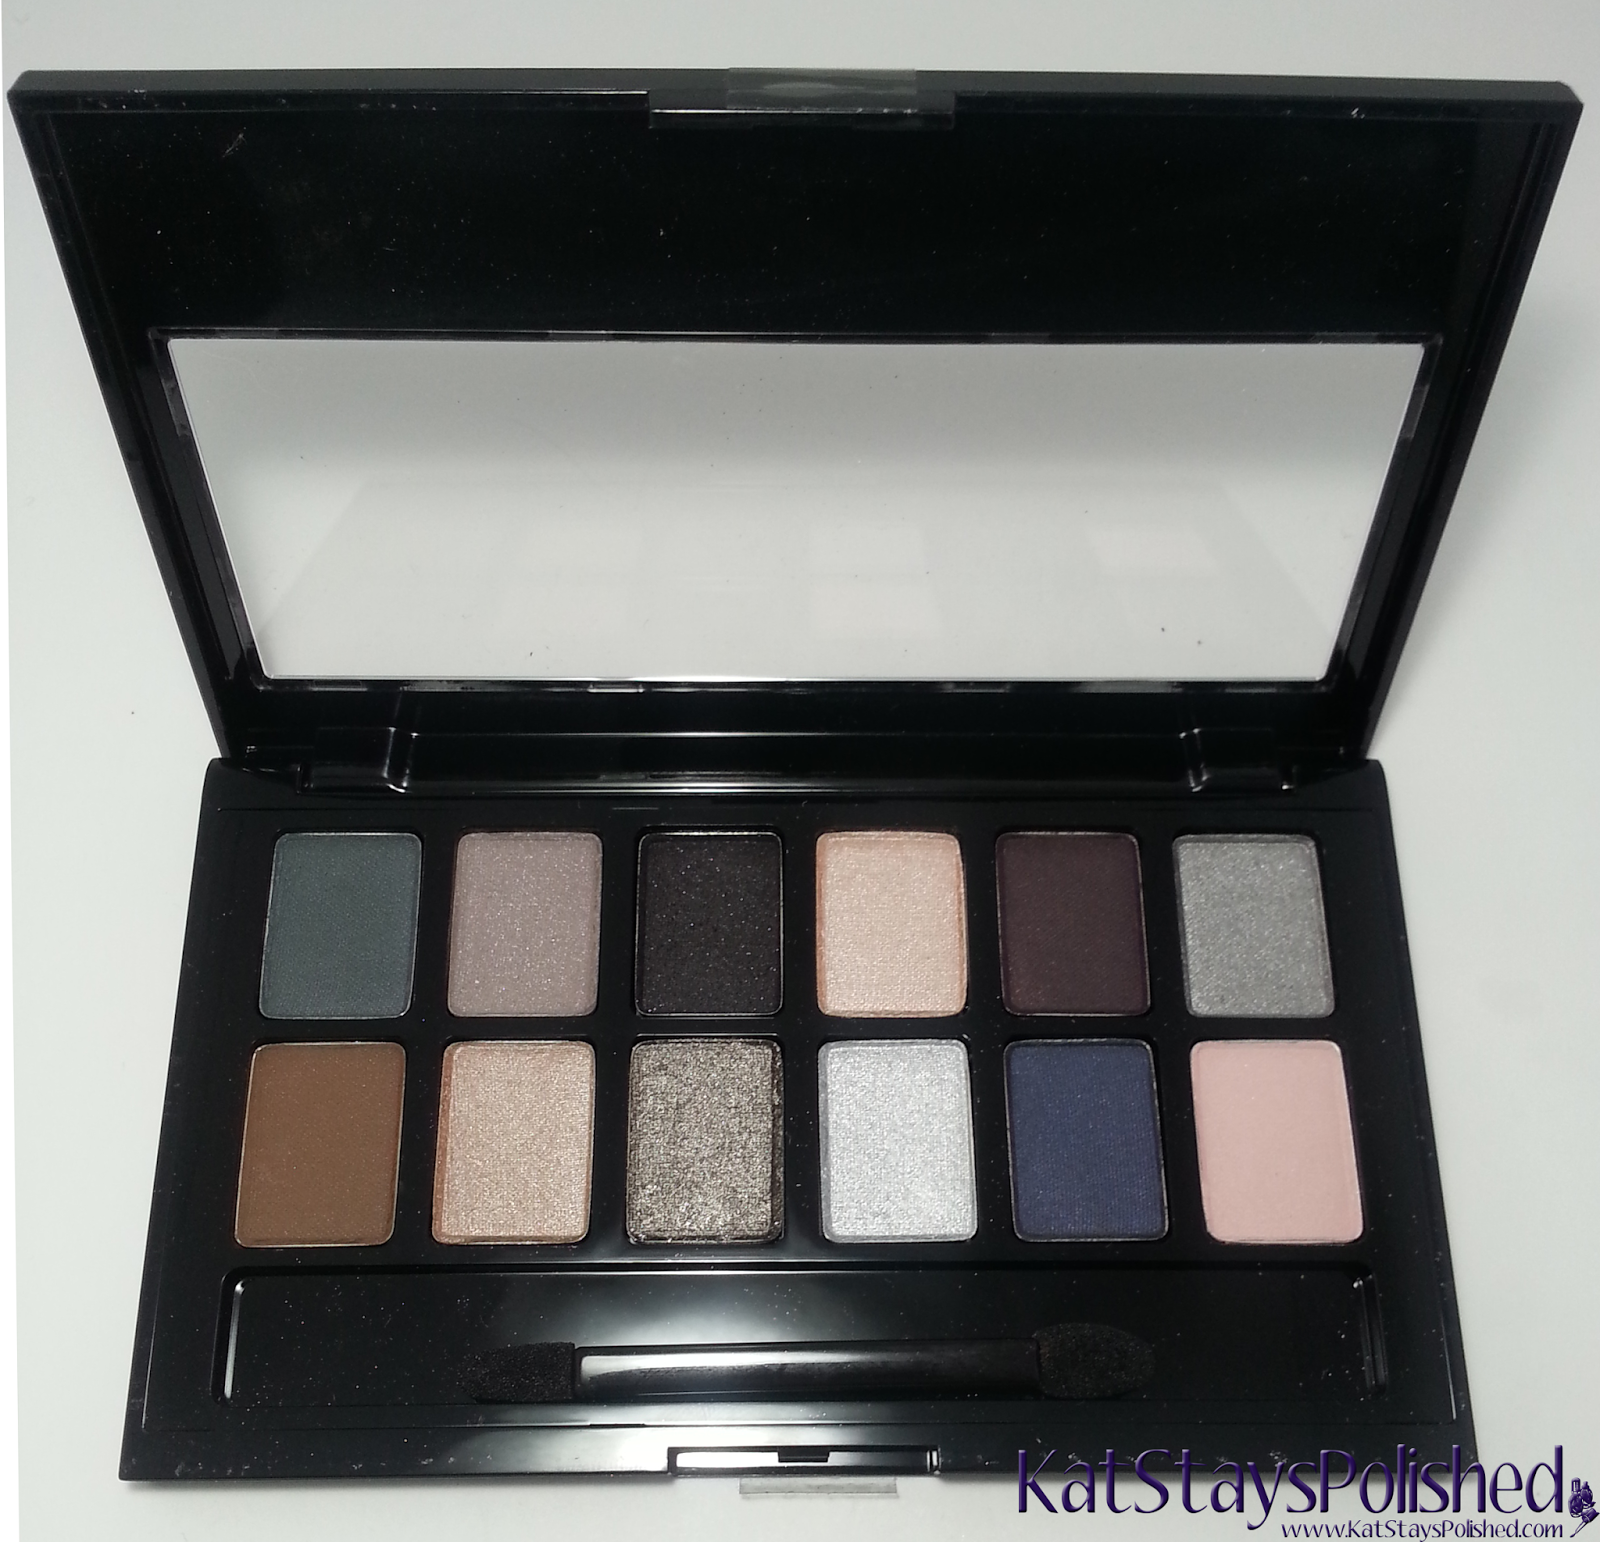 Maybelline - The Smokes Eye Shadow Palette | Kat Stays Polished